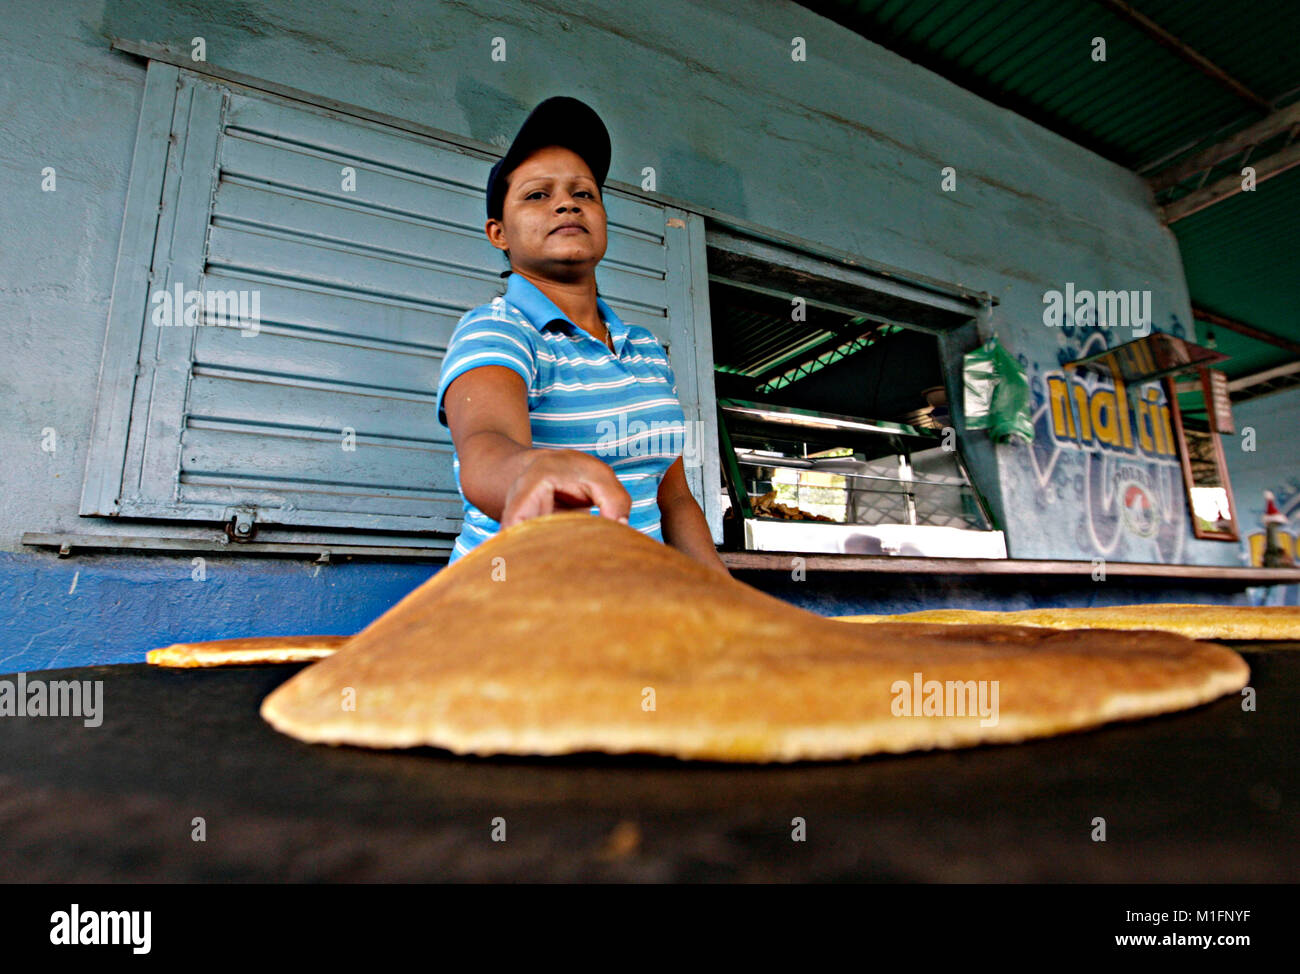 Maturin, Monagas, Venezuela. 8th Dec, 2012. december 09, 2012.A woman flips the cachapas in the budare that is a rudimentary kitchen of brick and clay, in the city of Matur'n, Monagas state, Venezuela.foto: Juan Carlos Hernandez Credit: Juan Carlos Hernandez/ZUMA Wire/Alamy Live News Stock Photo